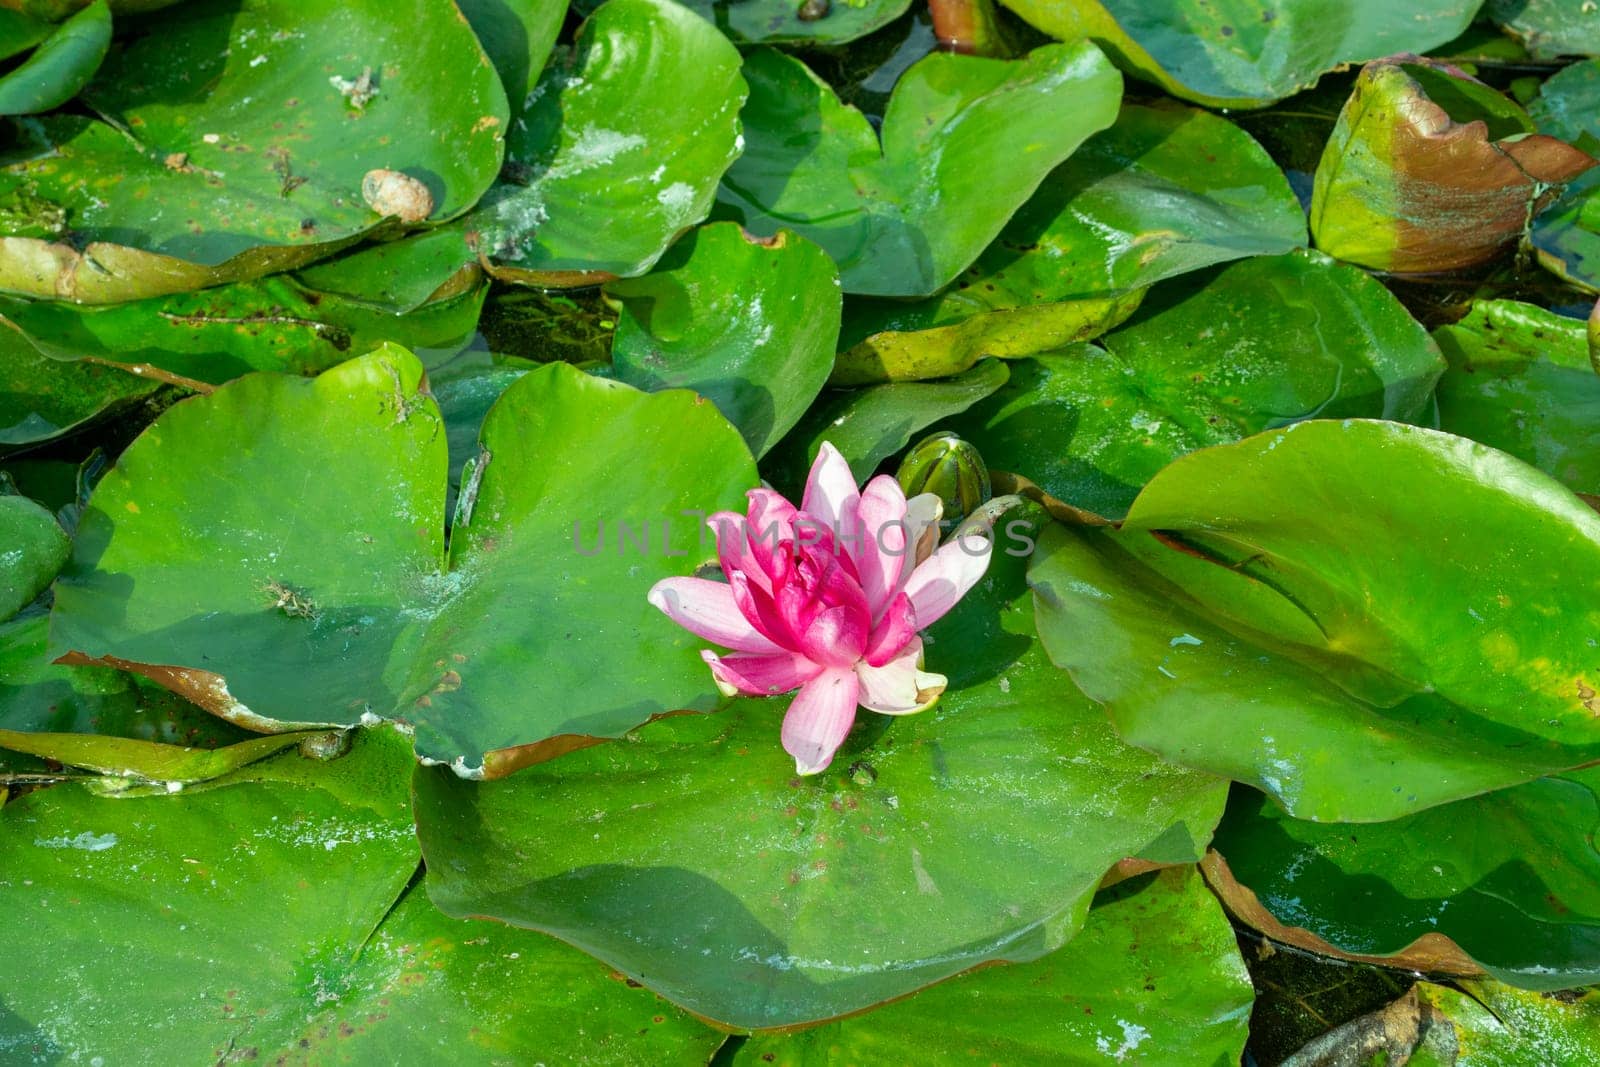 gentle pink flower among the green leaves of water lilies by feoktistova